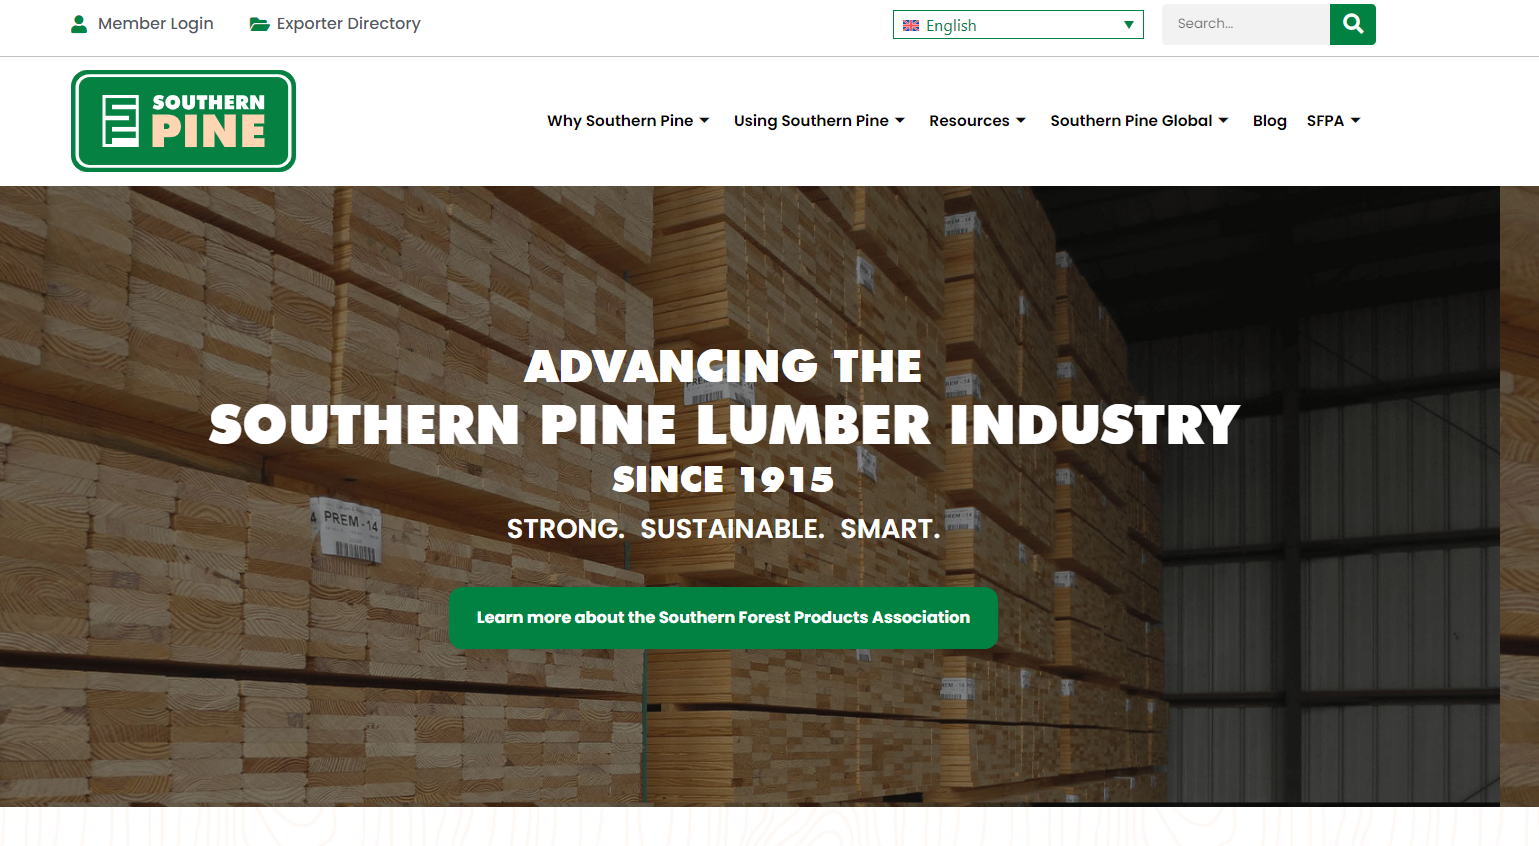 Southern Pine lumber technical guidance